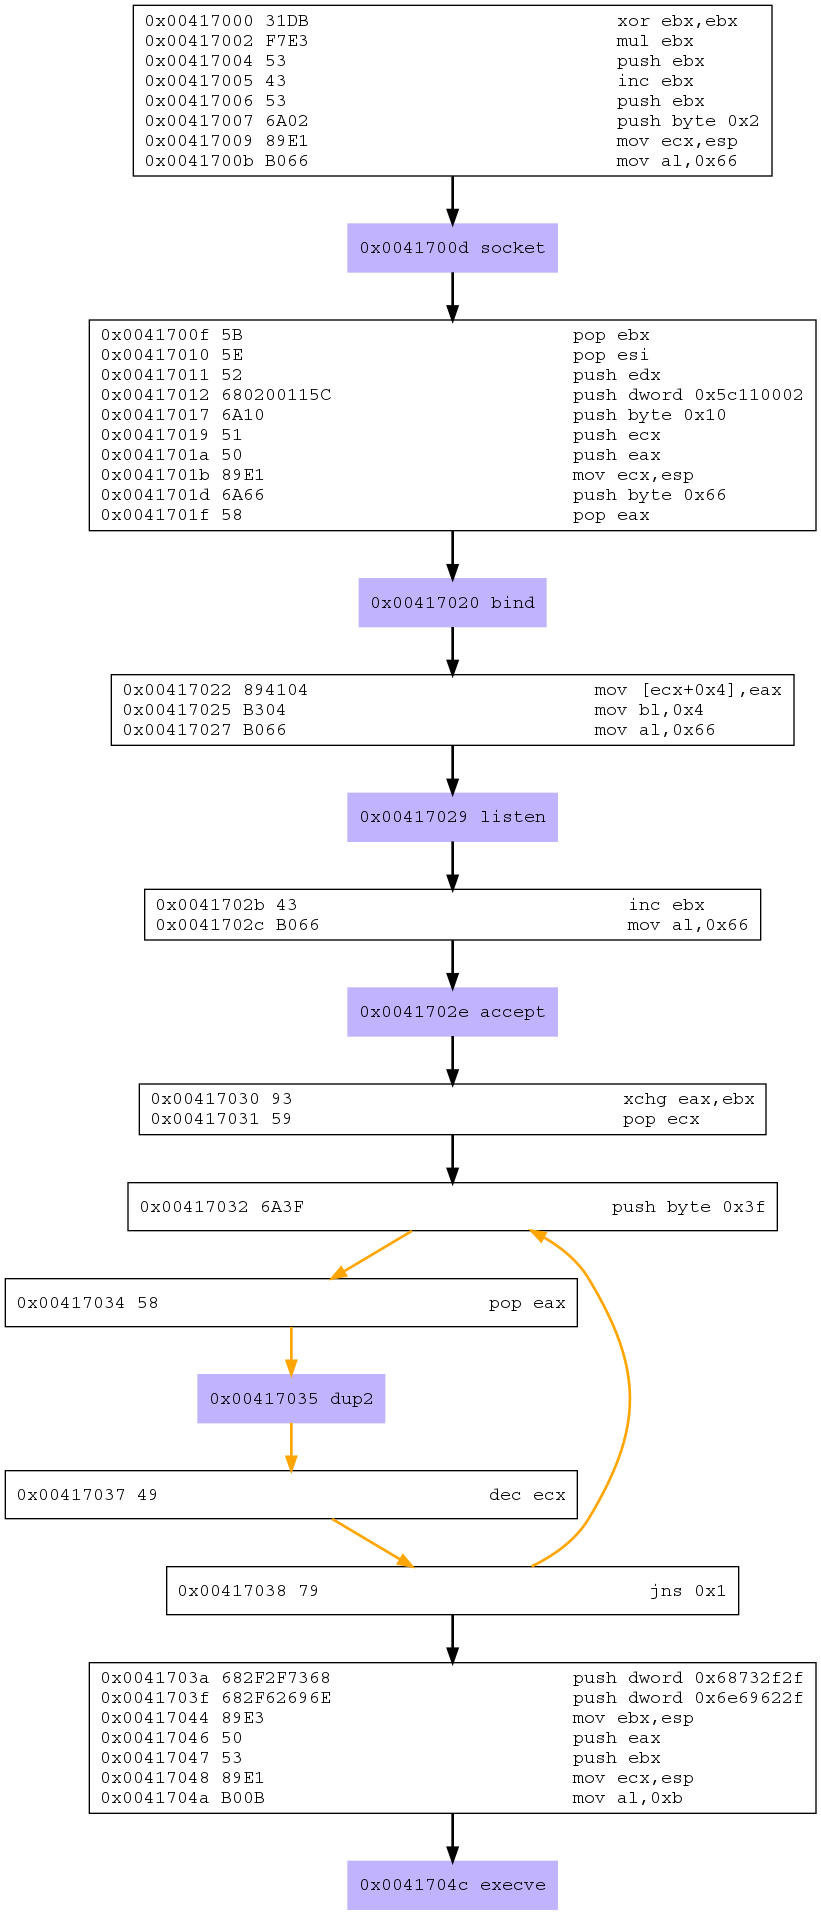 Control Flow of Shellcode